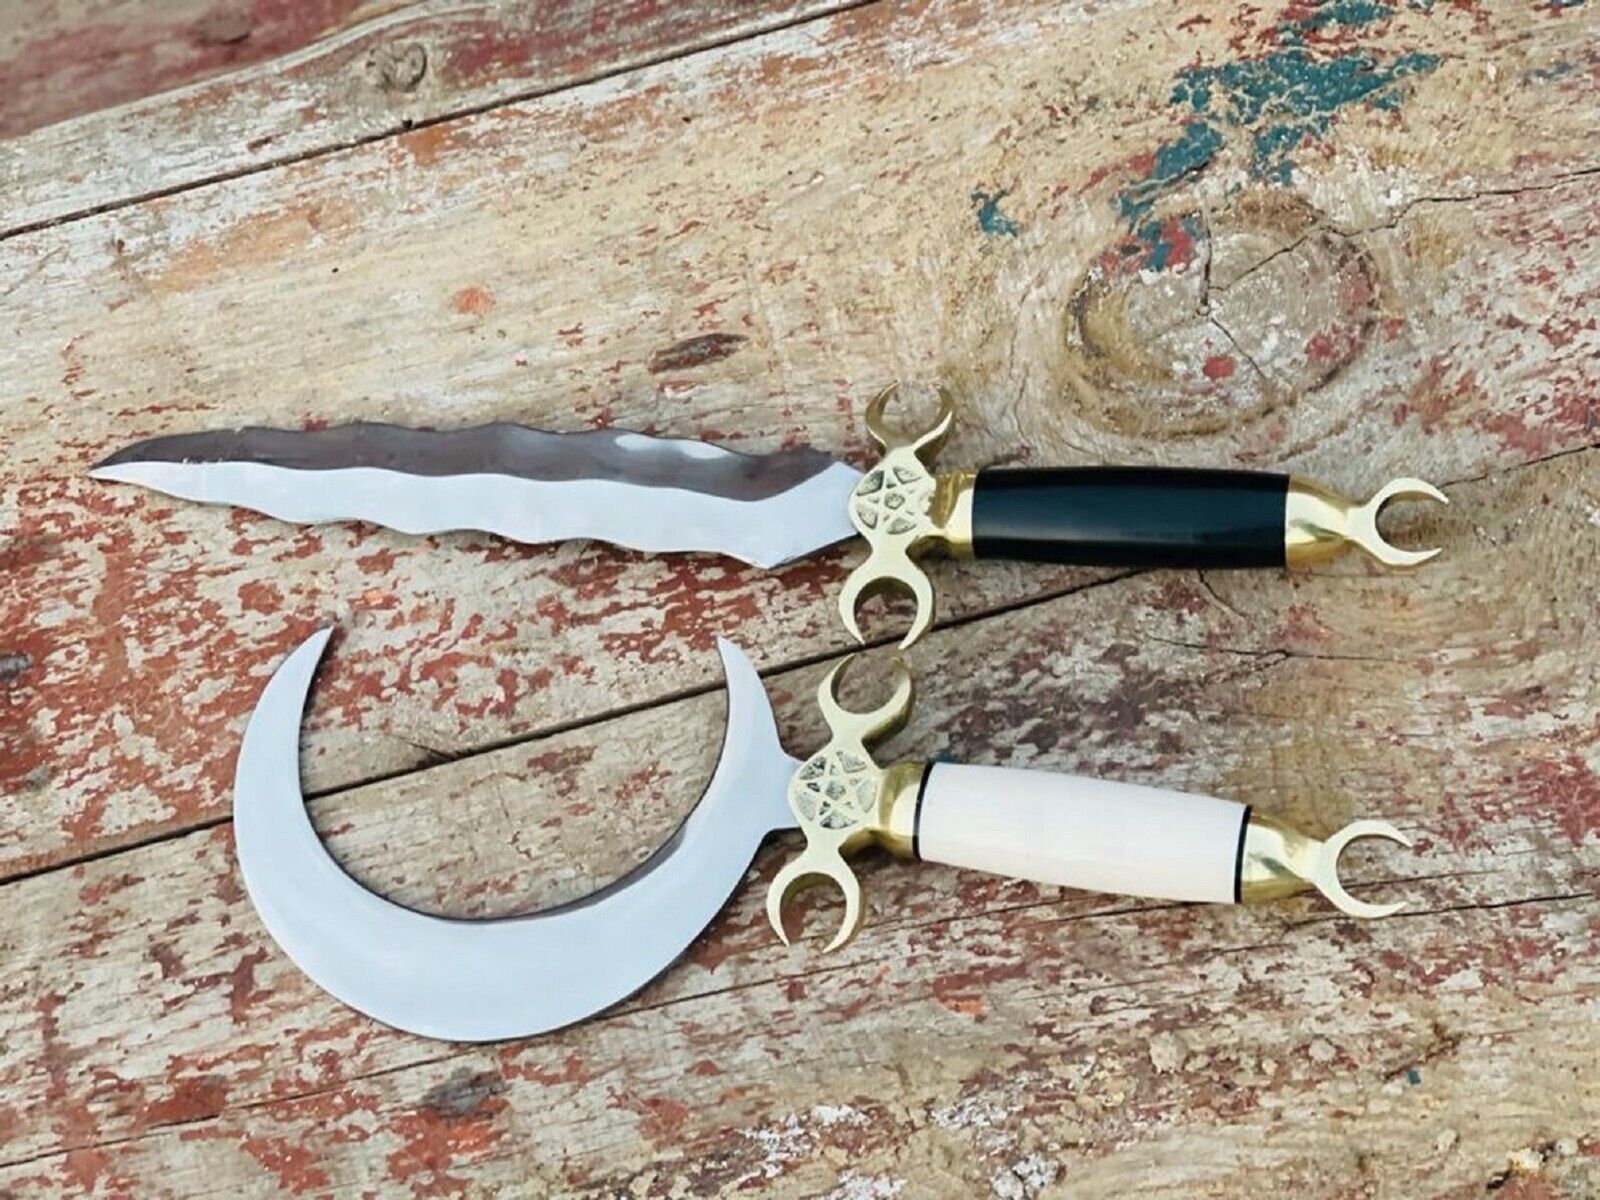 Druid\'s Crescent Moon Boline with Bone Handle for Ritual Work, Wicca, Witchcraft